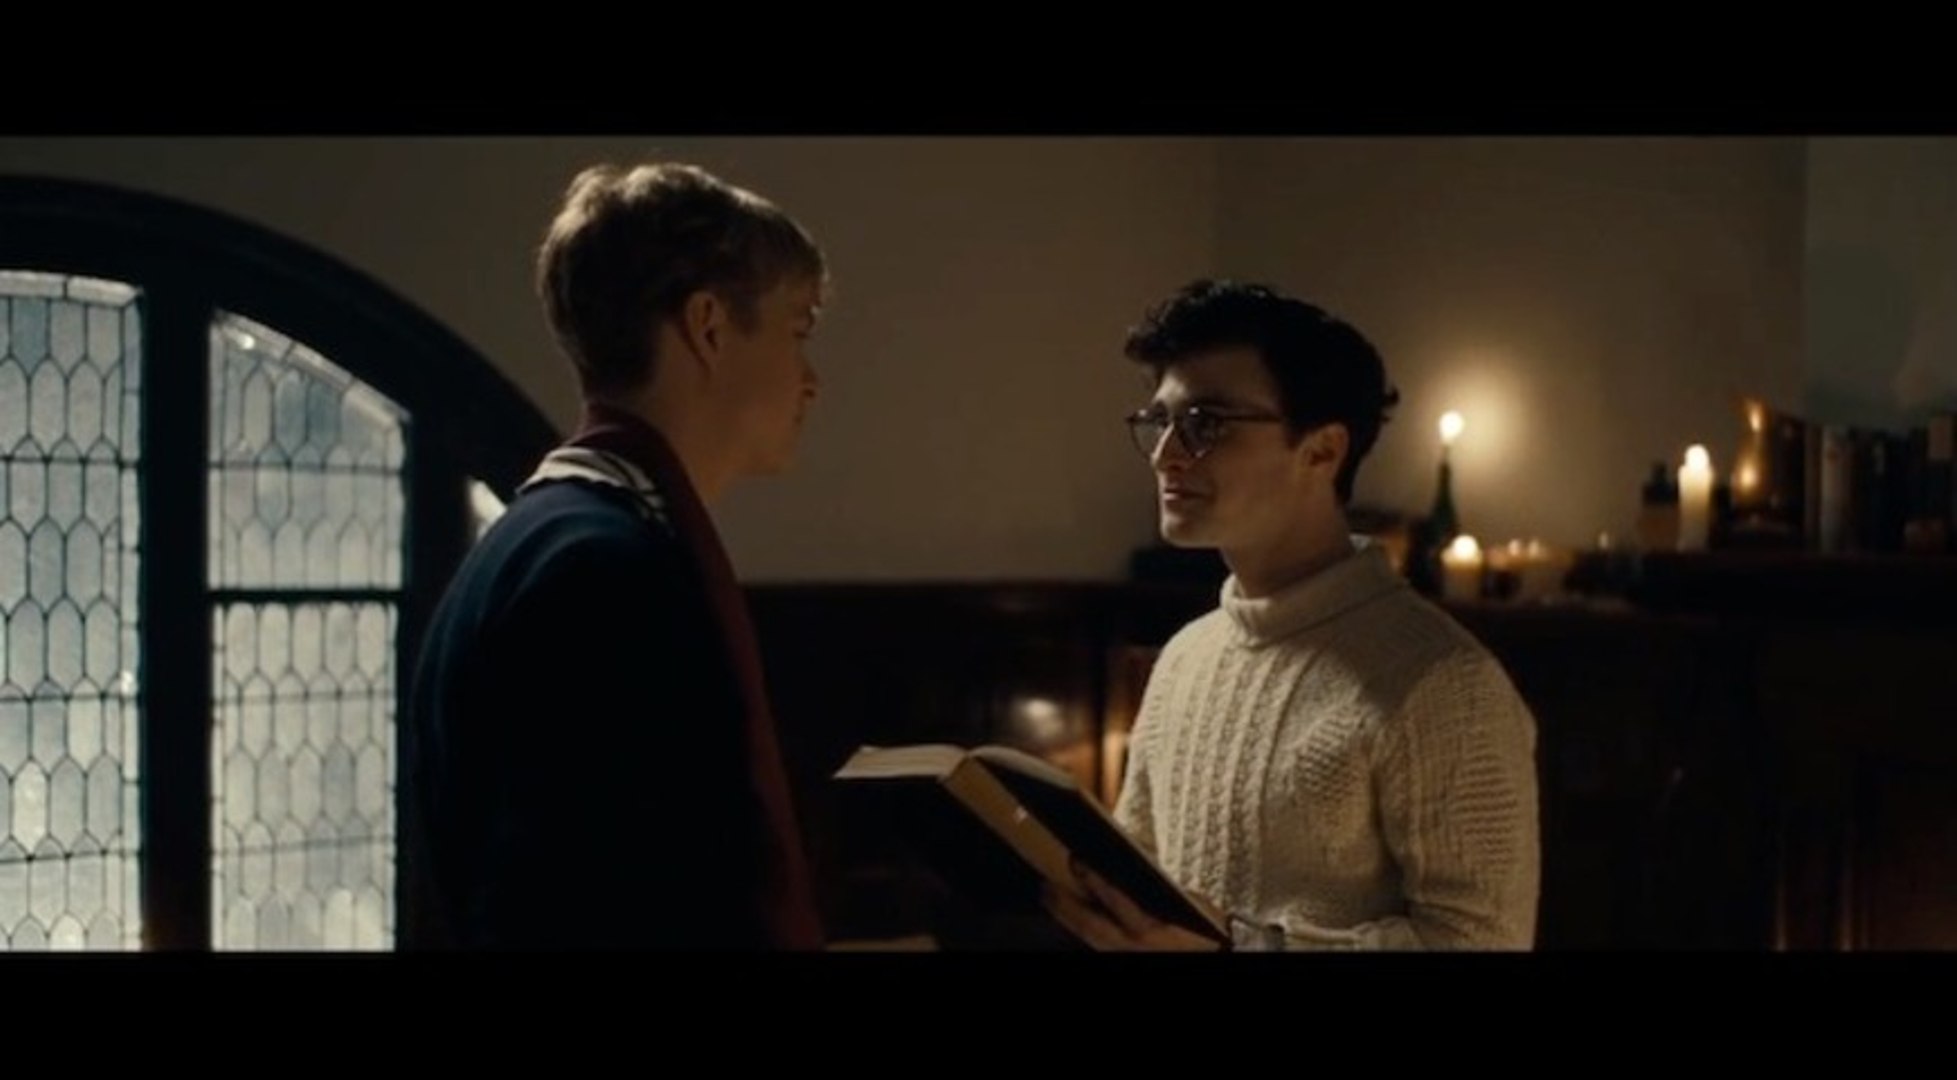 NARNIA MEETS HEREDITARY THIS SEPTEMBER IN UPCOMING SERIES KILL YOUR  DARLINGS